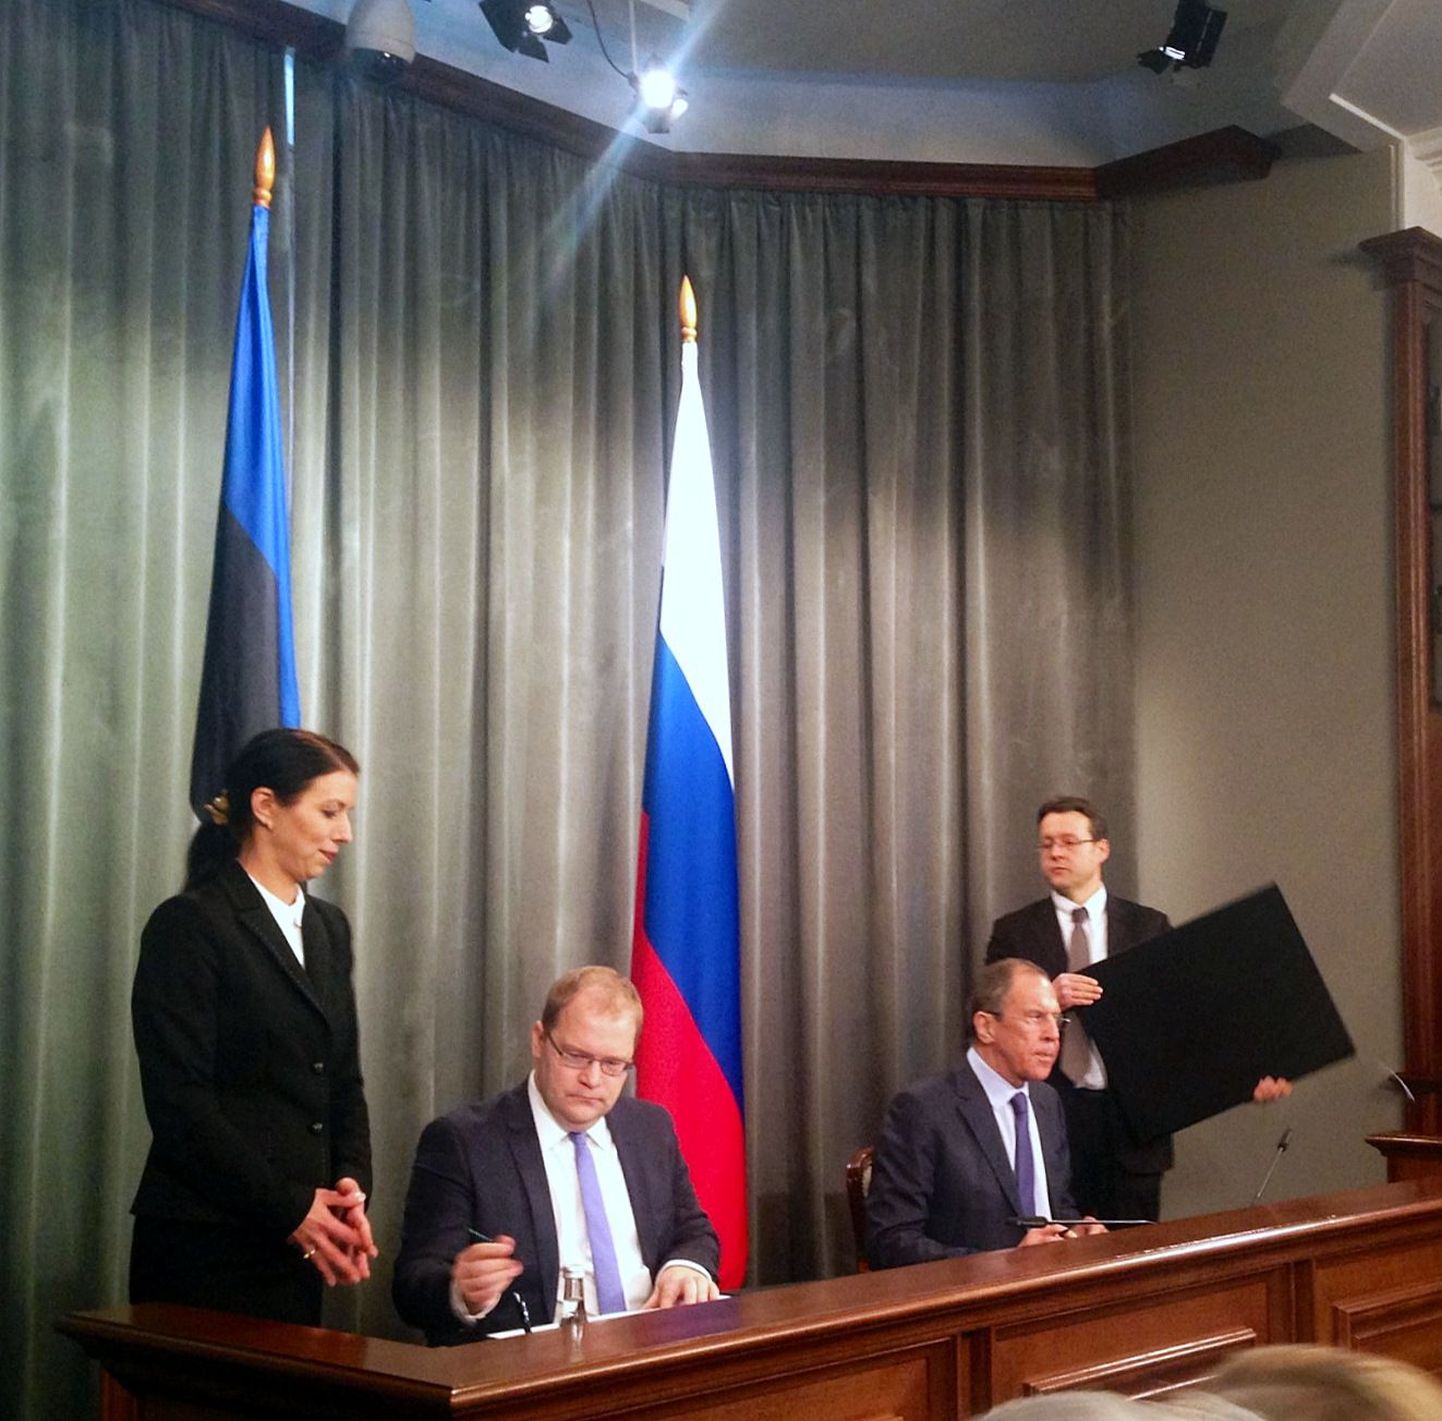 Foreign Minister of Estonia Urmas Paet signed border agreement in Moscow on 18th February 2014.